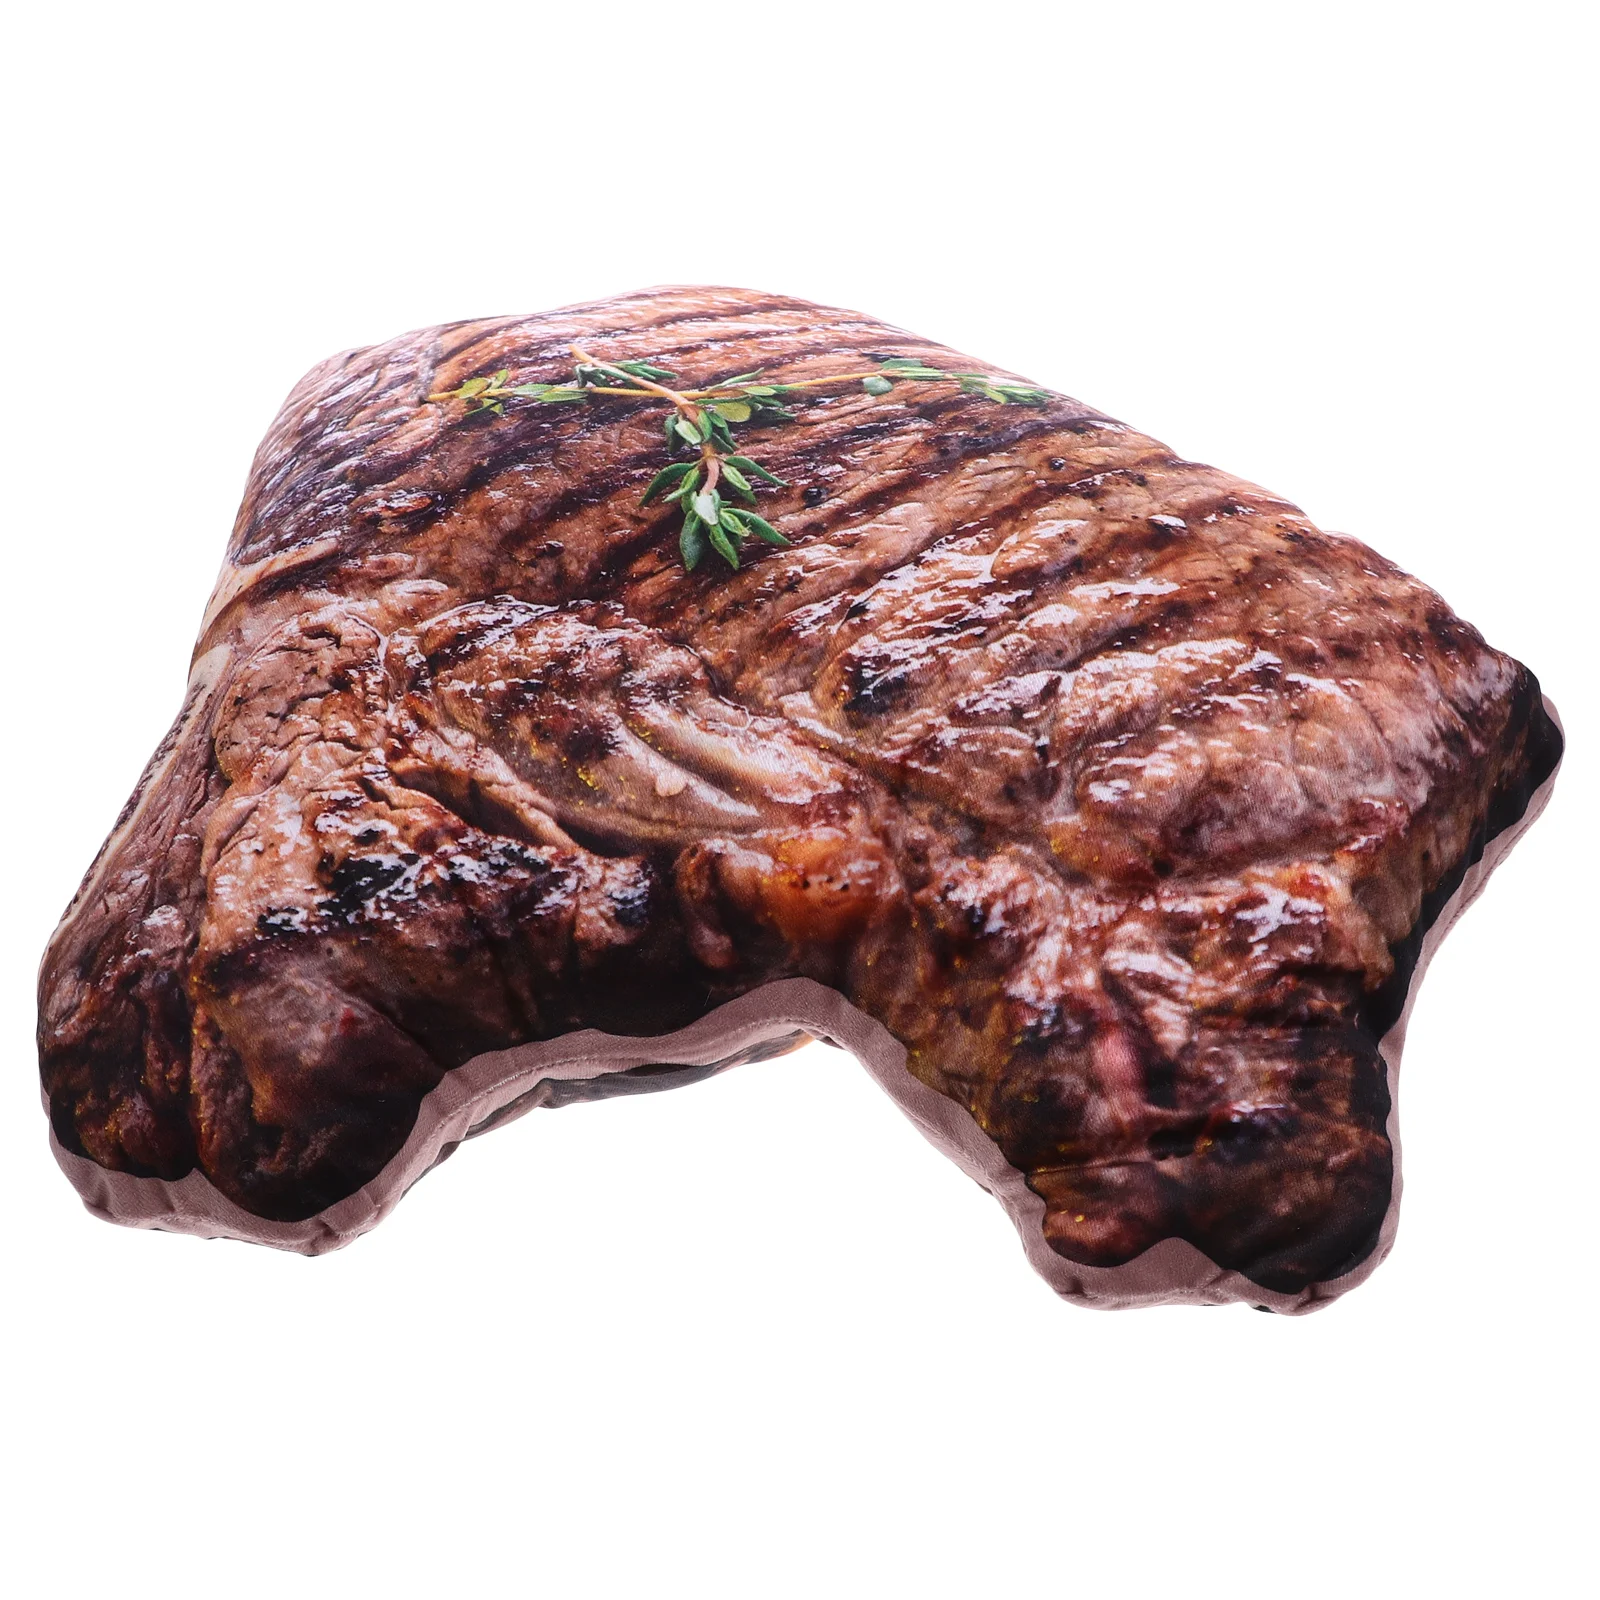 

Steak Pillow Sofa Leaning Cushion Stuffed Toy Plush Hugging Funny Cushions Bed Pillows